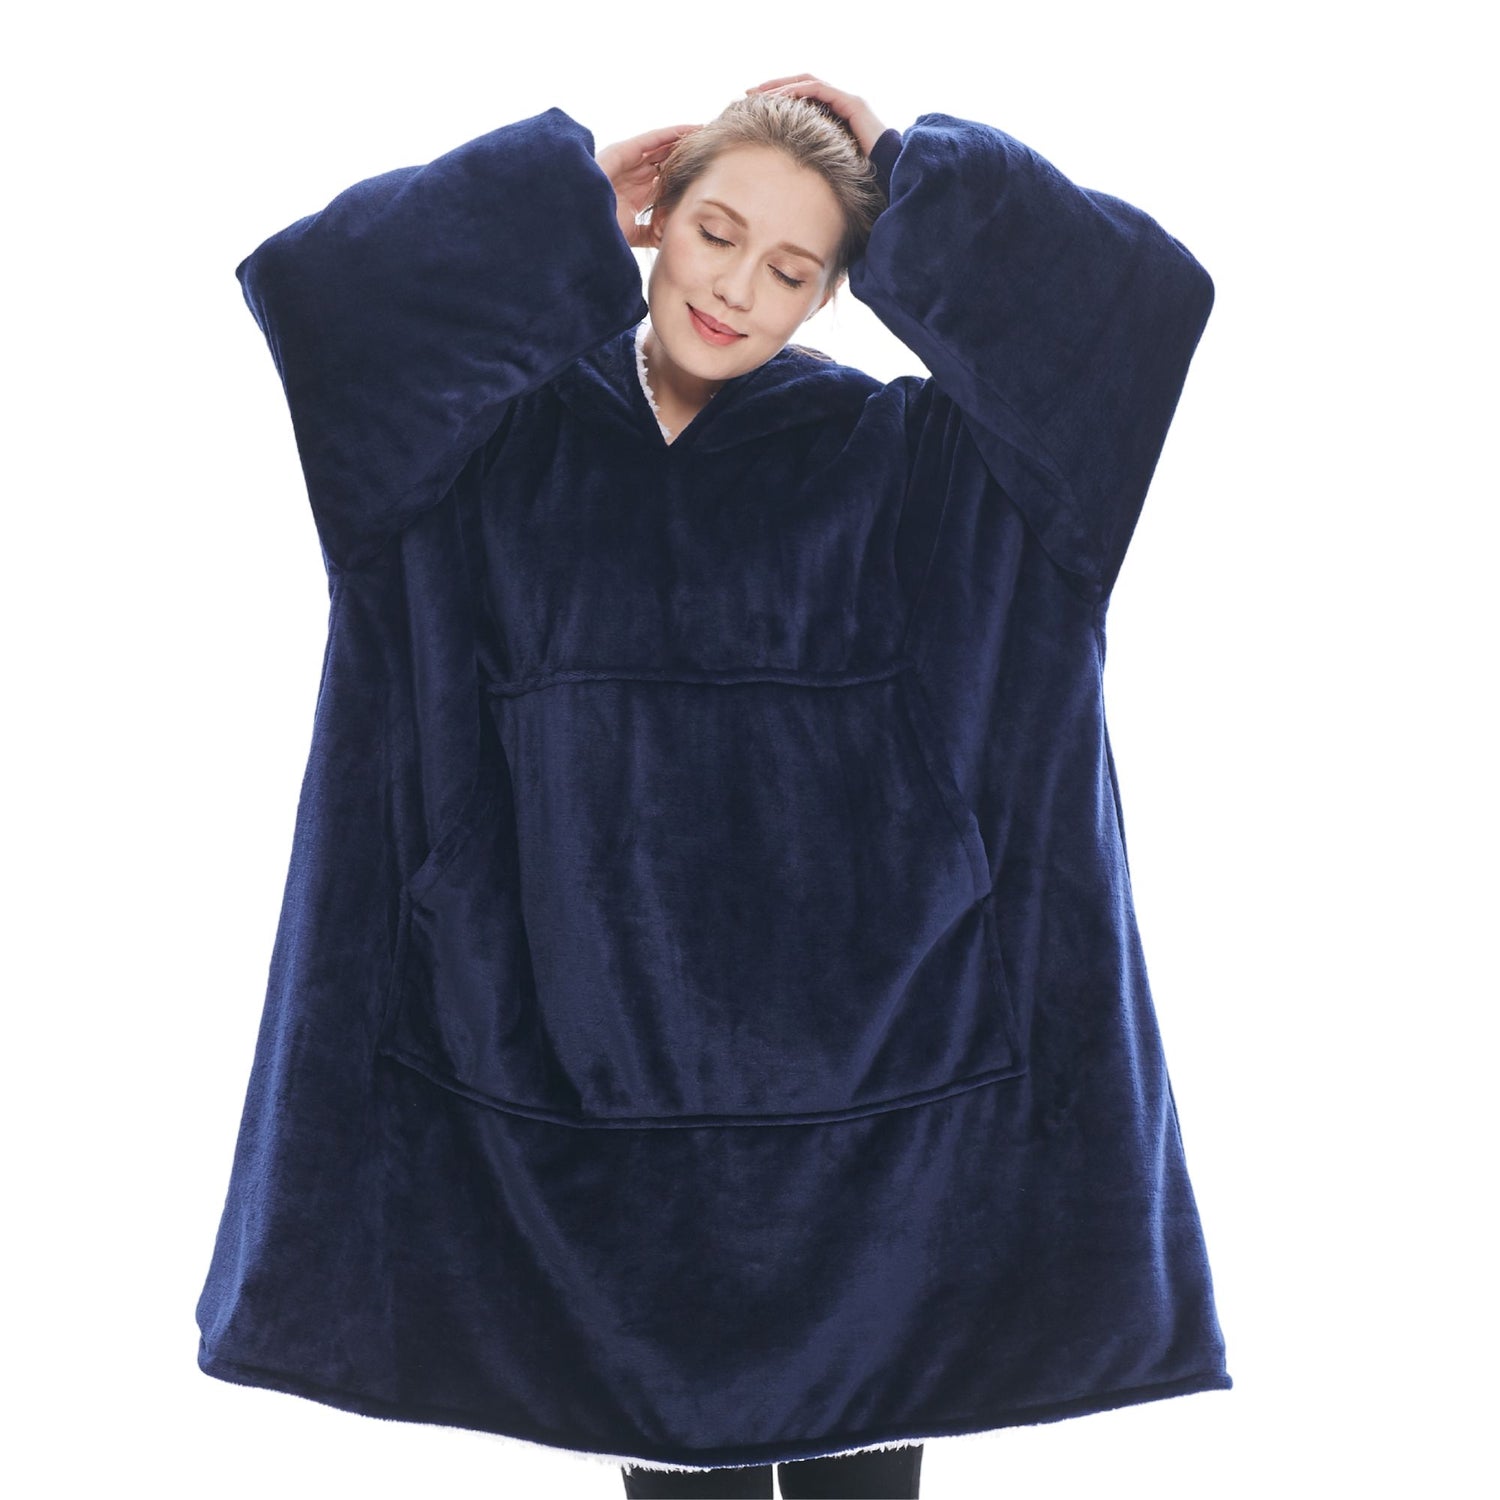 The Oversized Hoodie® navy blue woman hood large central pocket 